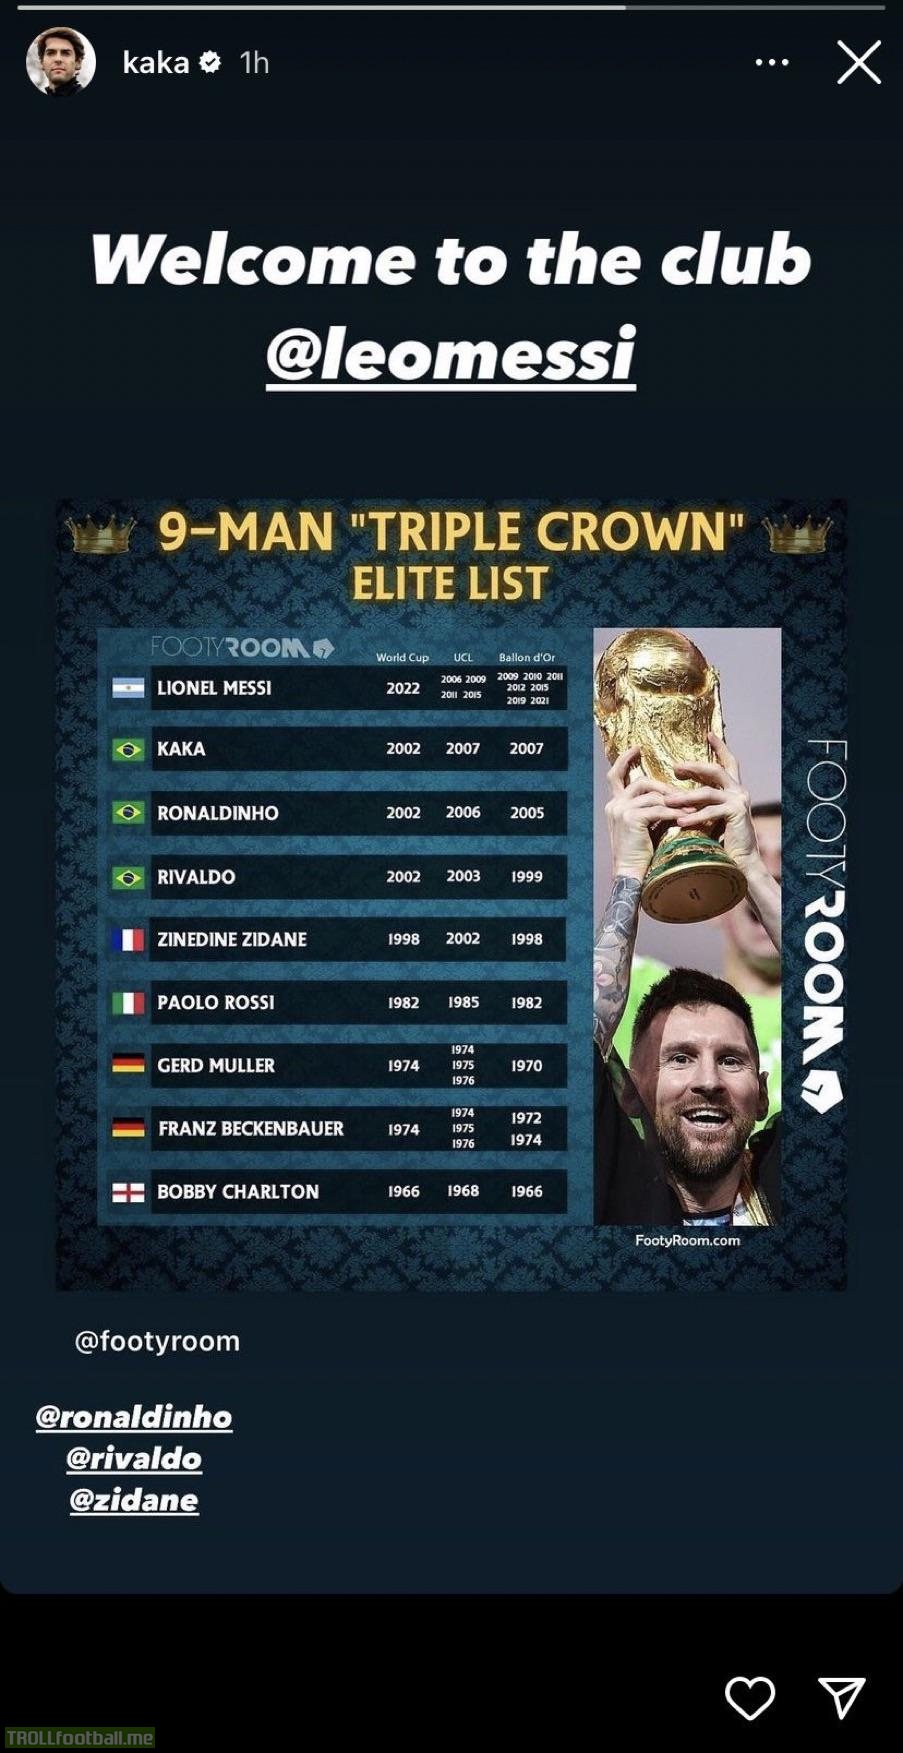 [Kaka on Instagram] - “Welcome to the club Messi” with a list of players who have won the World Cup, Champions League and Ballon d’Or.